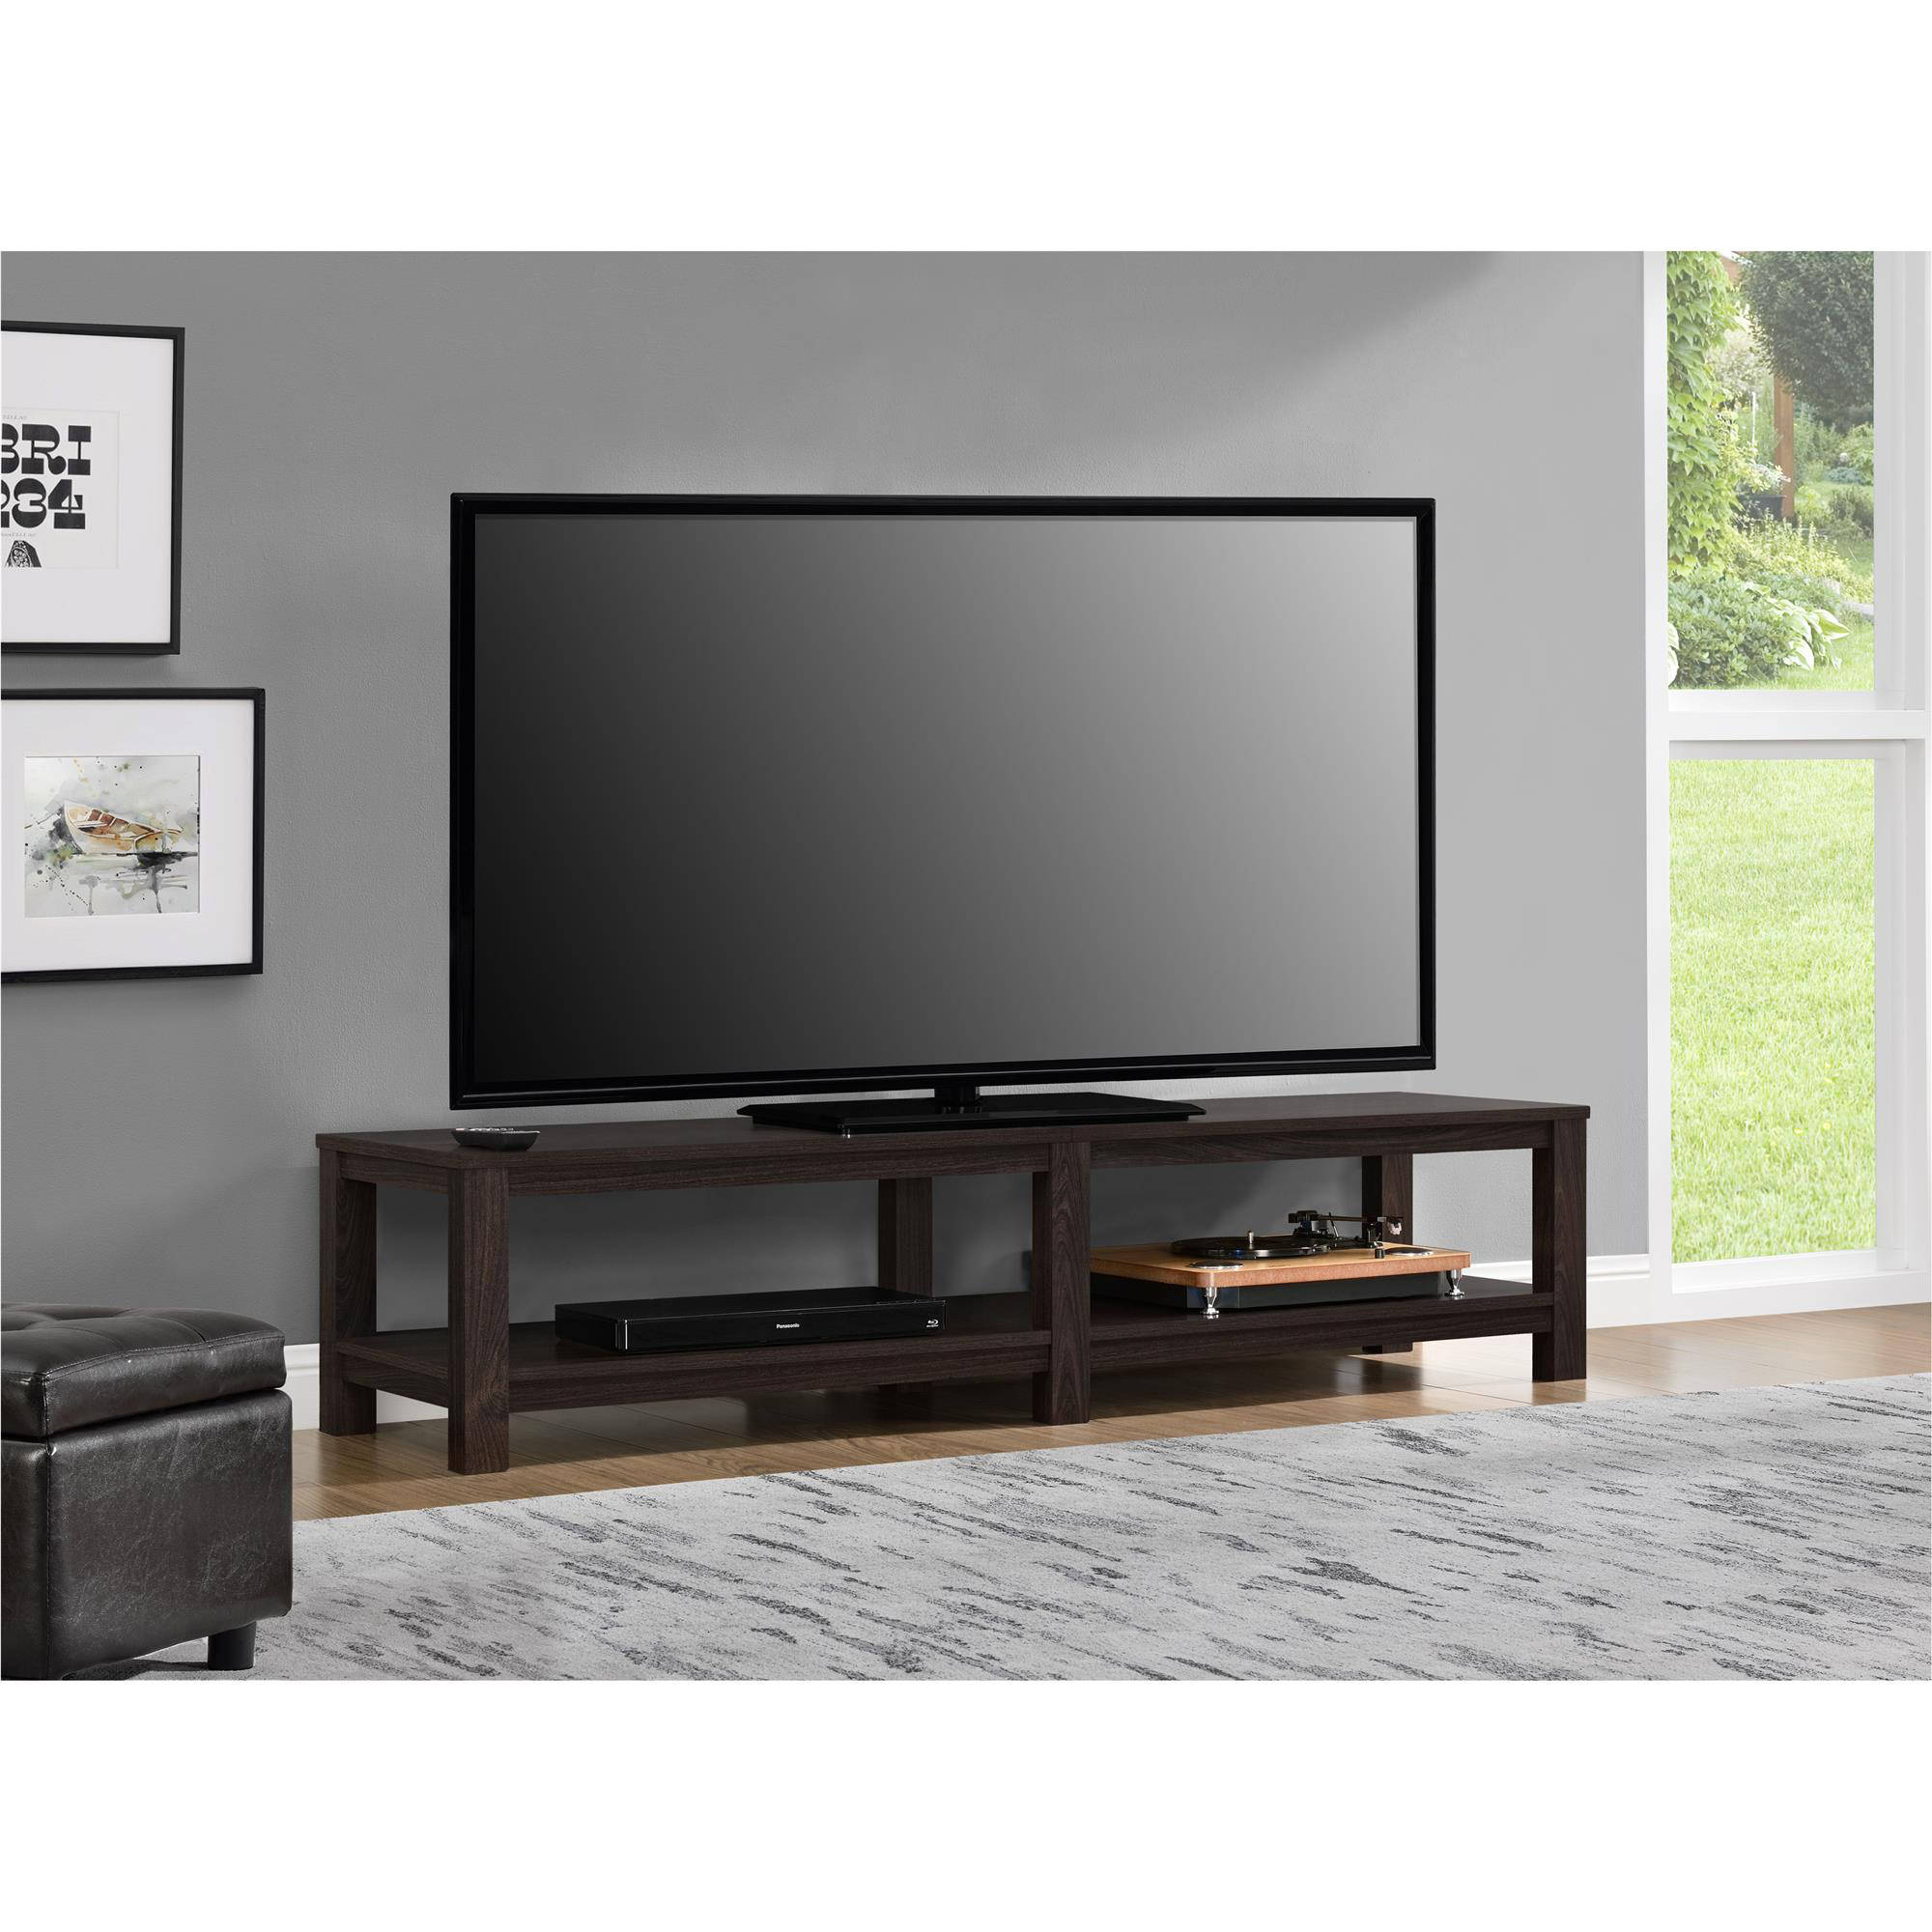 Multiple Co W Mainstays Parsons TV Stand for TVs up to 65" 